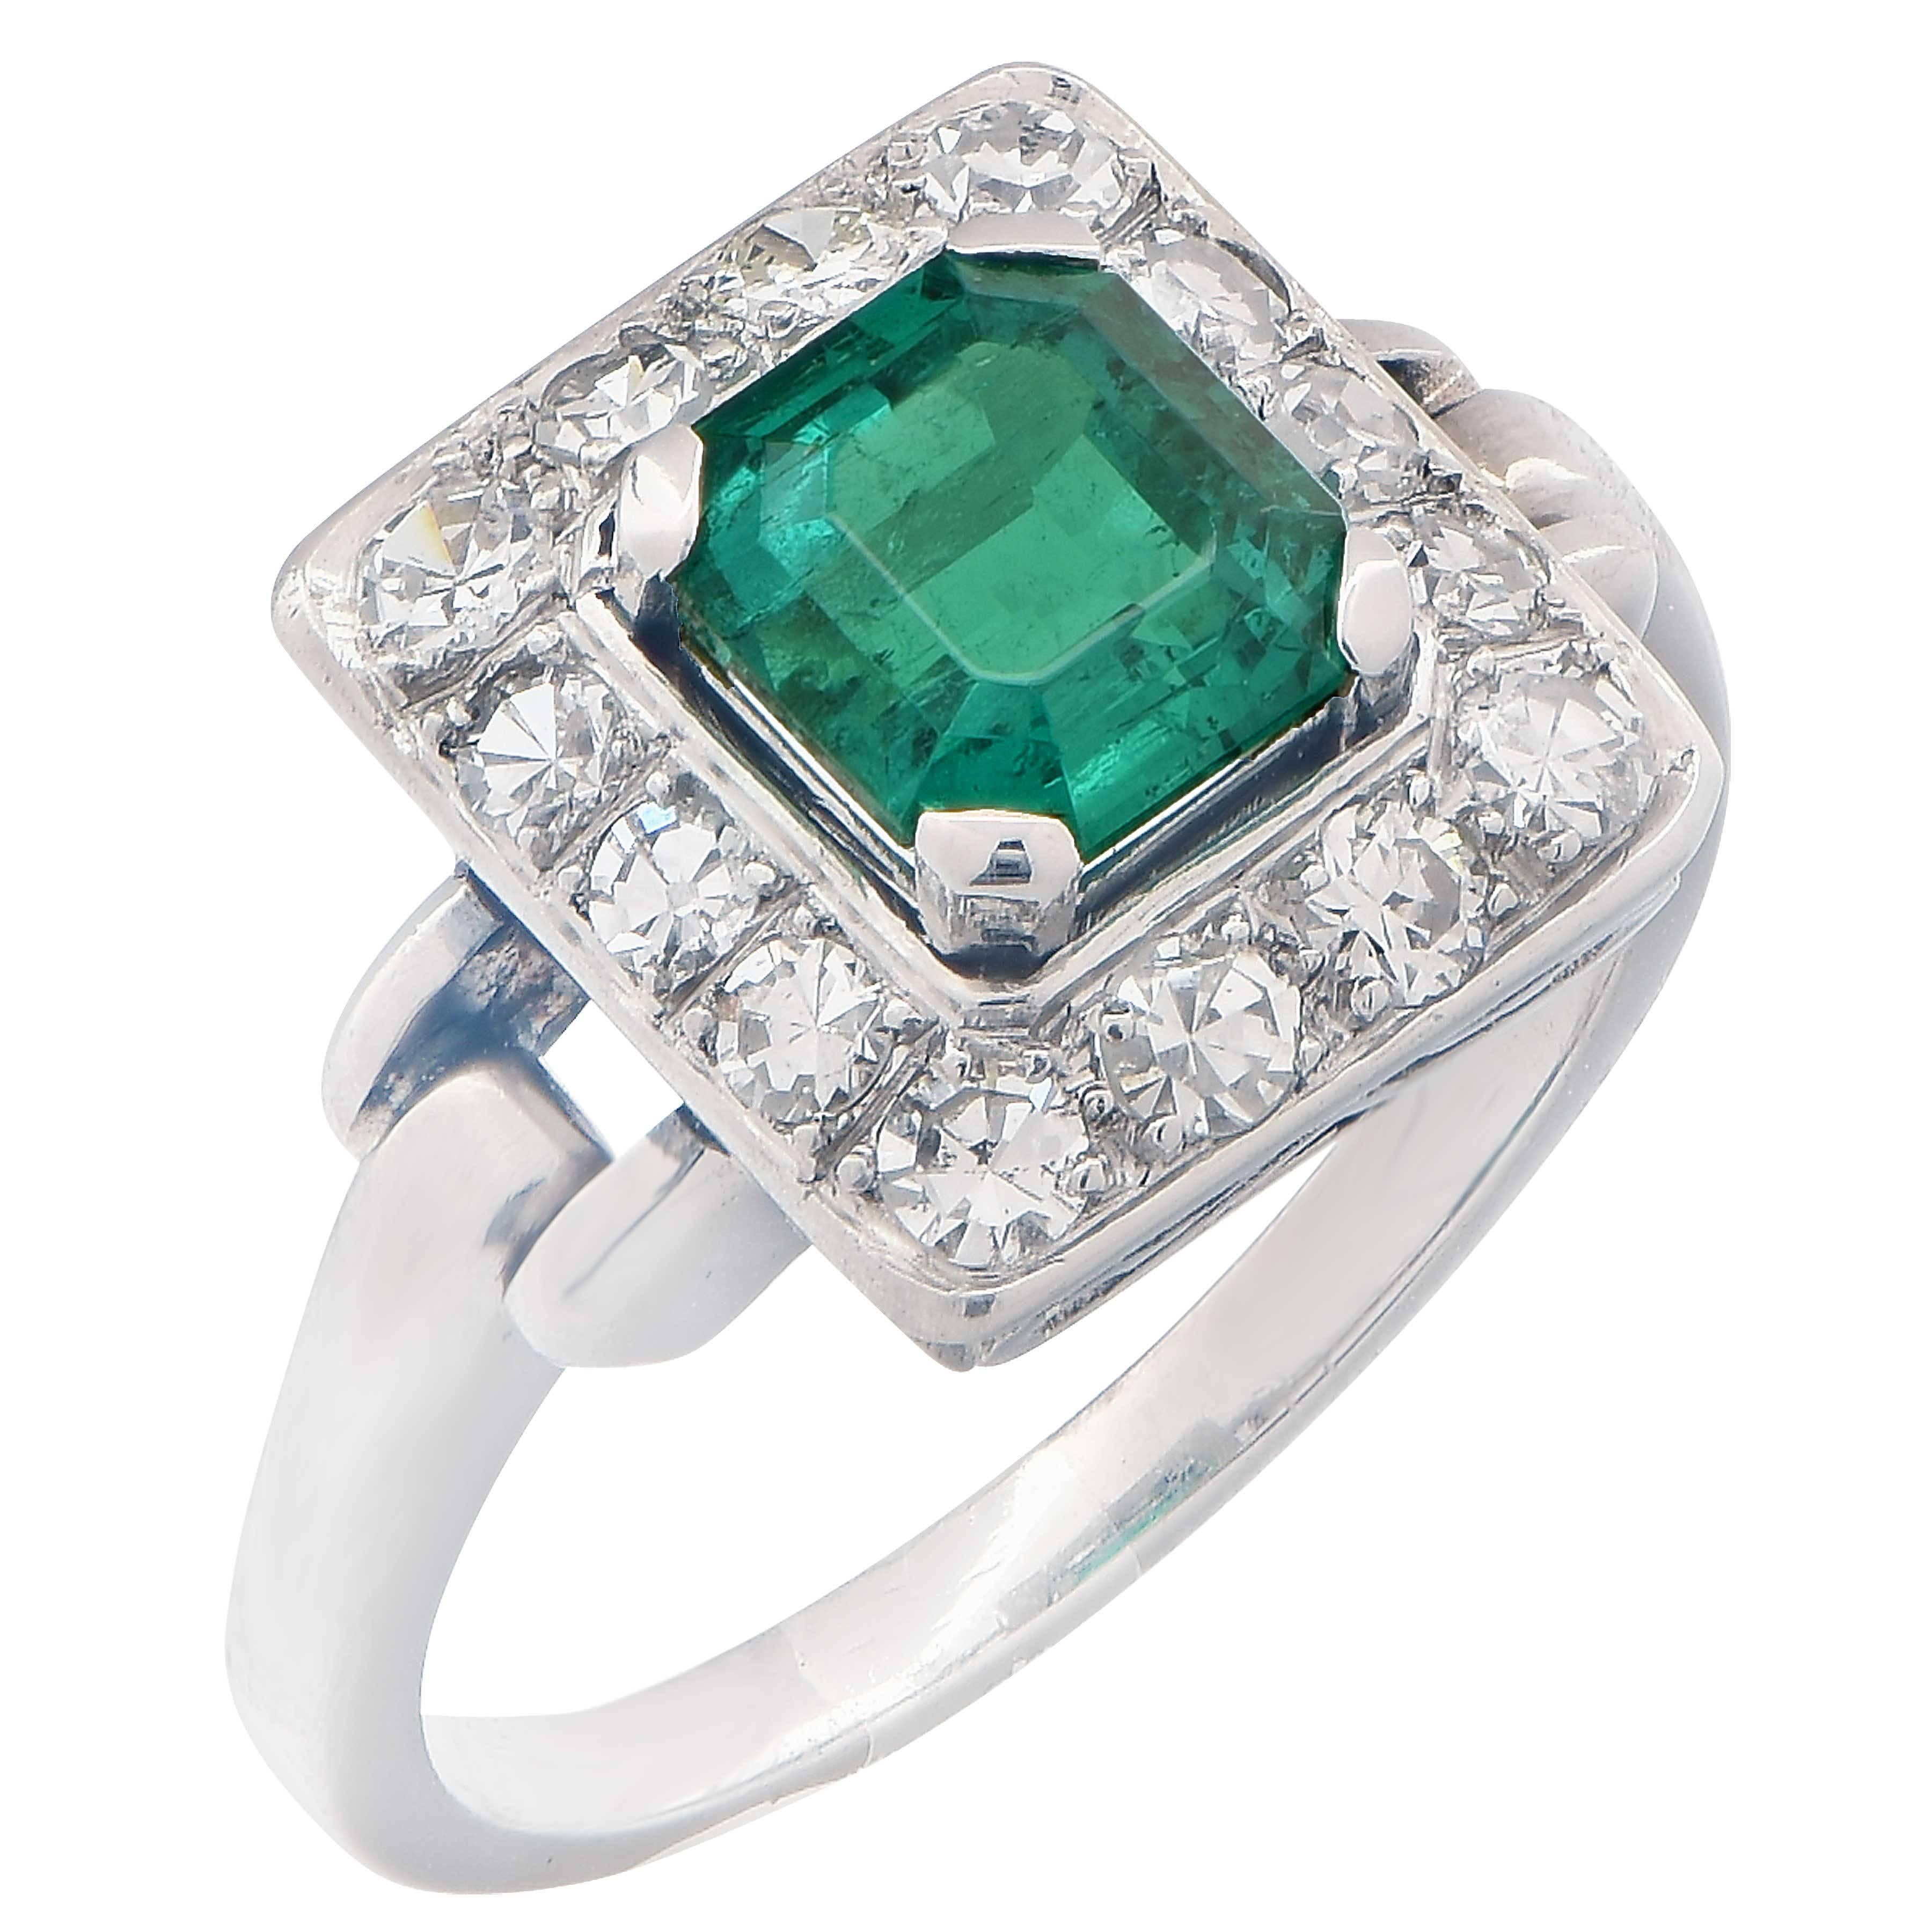 1.36 Carat Colombian Emerald No Treatment AGL Diamond Ring For Sale